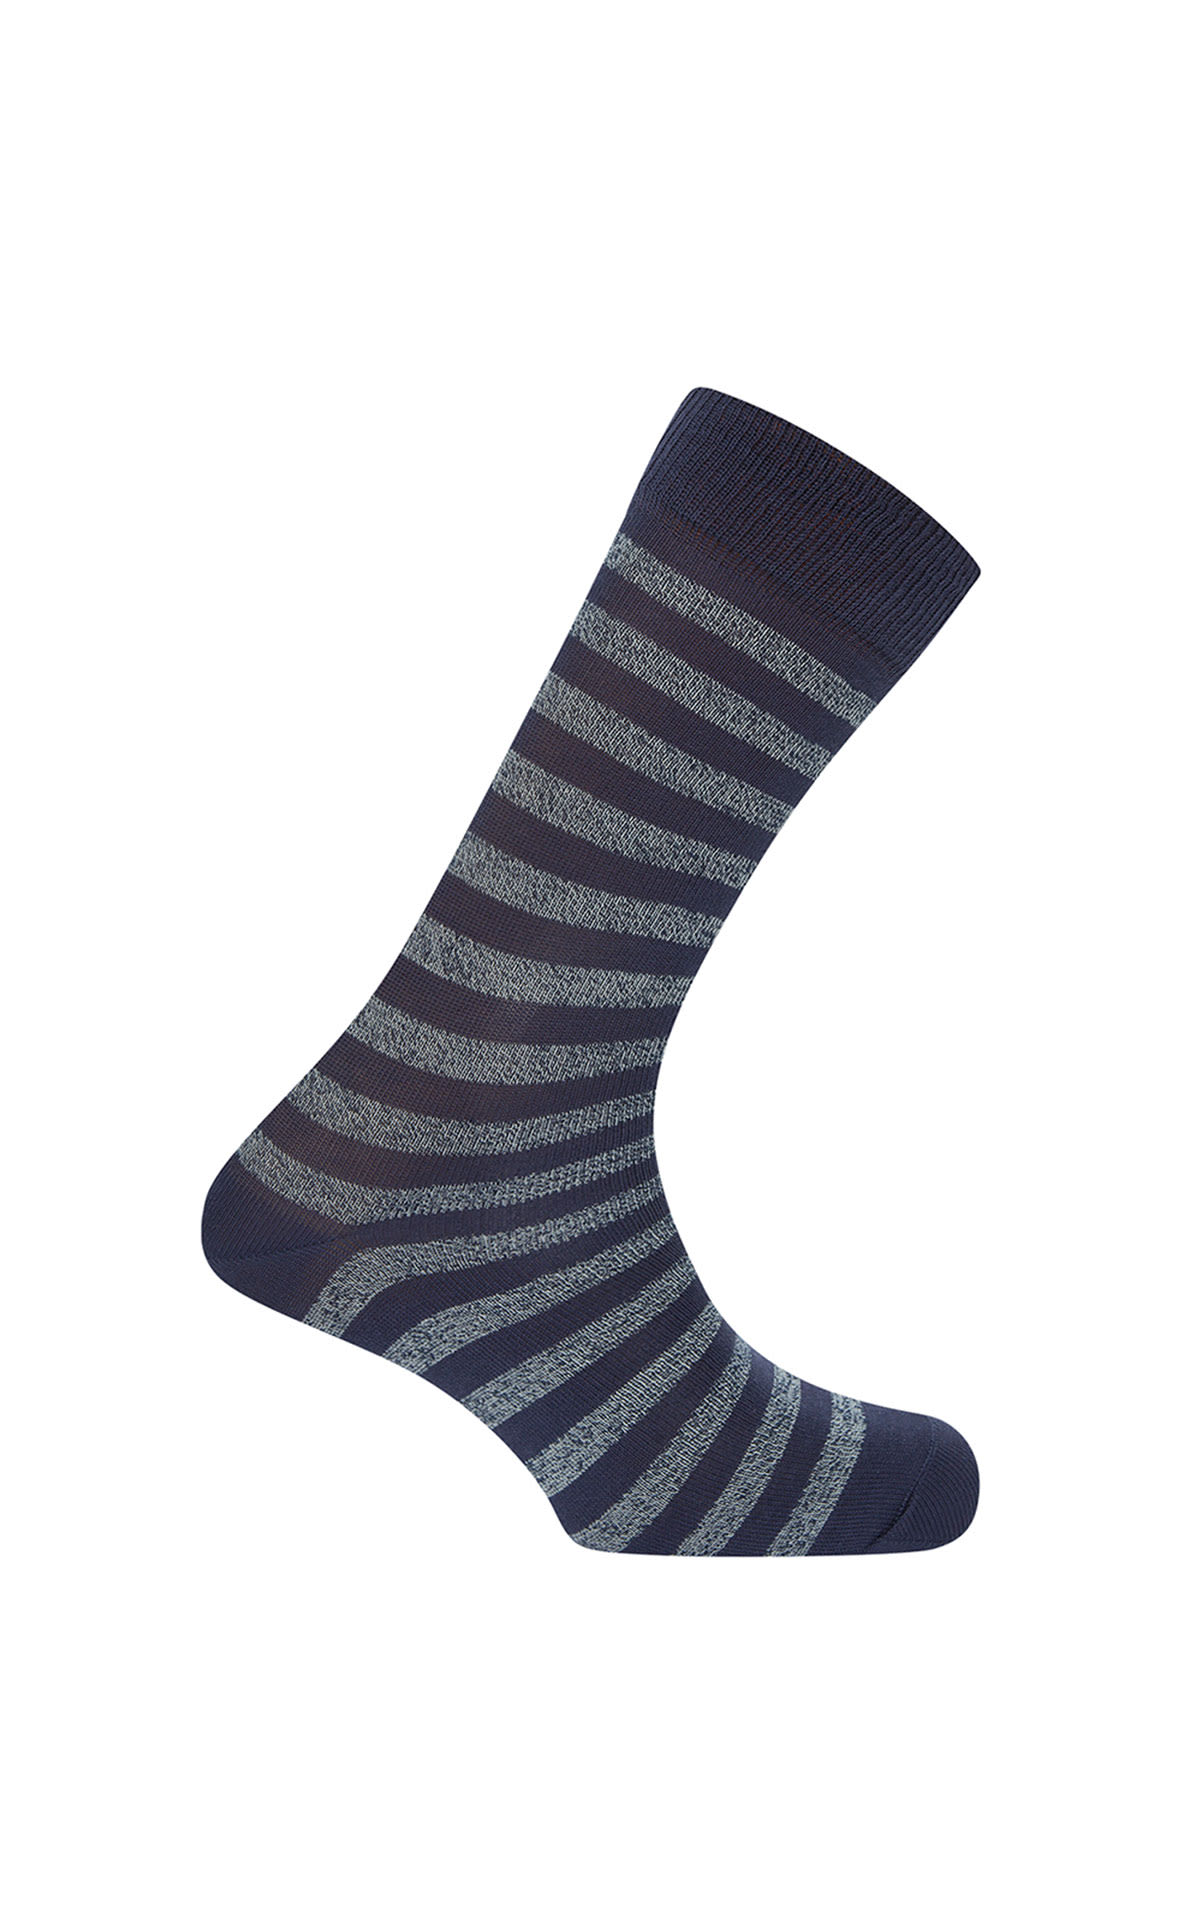 Blue and gray striped sock Punto Blanco